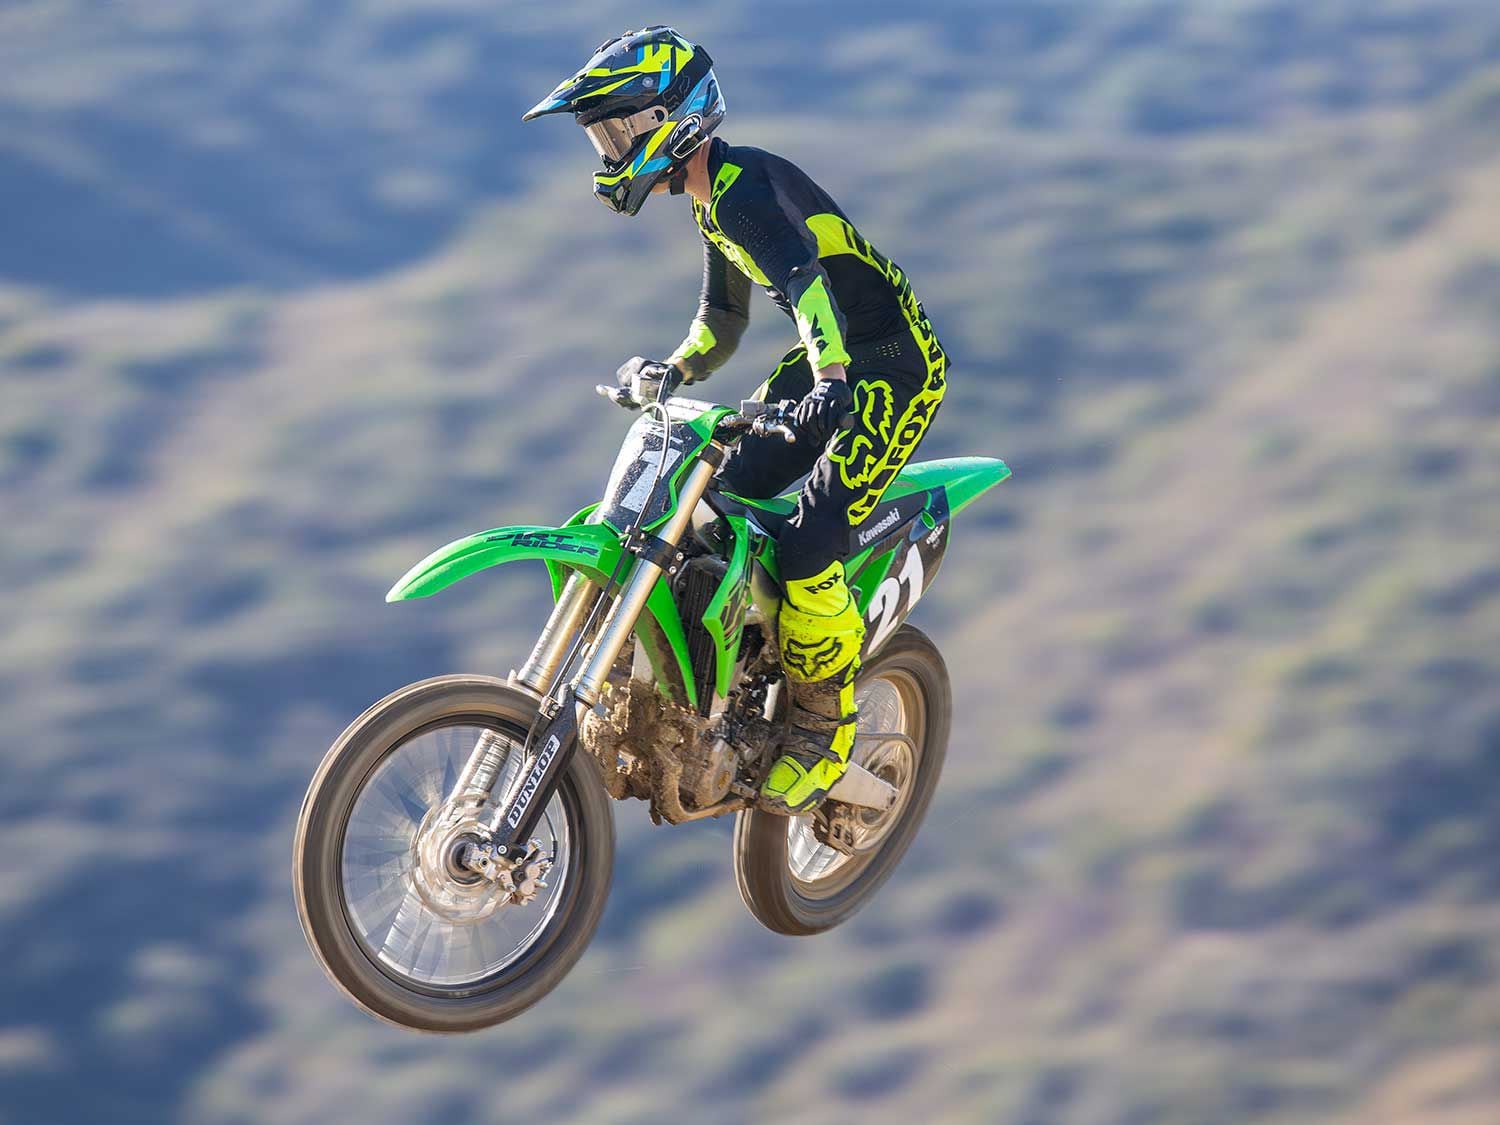 “Because I very much enjoy riding the Kawasaki KX450, I figured I would like the KX250 even more being that I am on the lighter side of the weight spectrum. However, that assumption proved to be incorrect. As it is on the 450, the smaller-displacement KX’s chassis is remarkable in the way it handles neutrally and offers the best ergonomics, but I feel its potential is hidden beneath a stiff, overly sprung suspension setup for the average 250F rider.” <em>—Andrew Oldar</em>